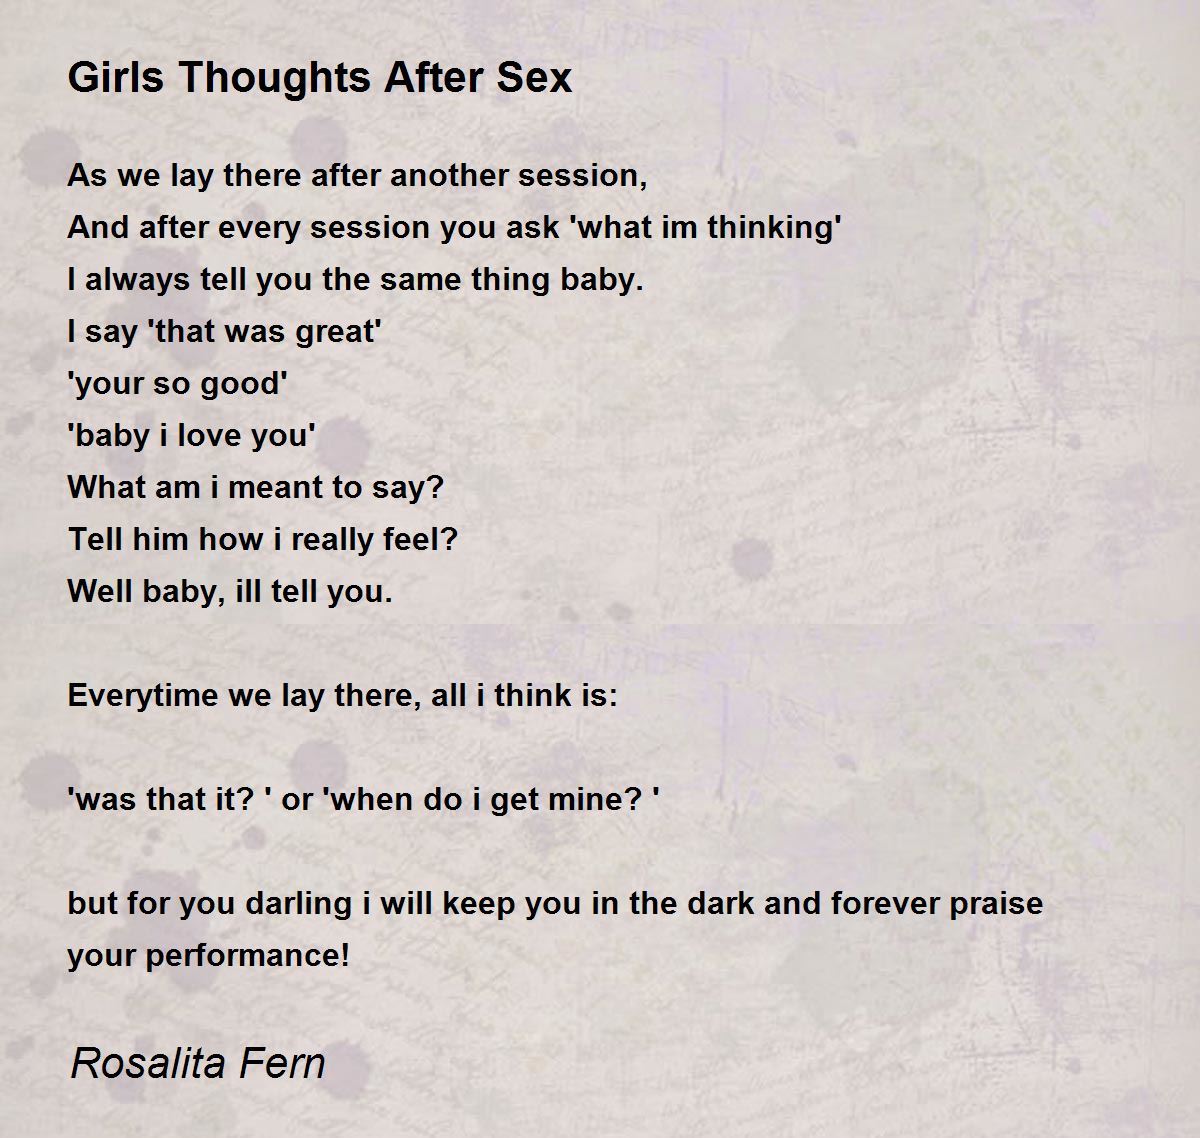 Girls Thoughts After